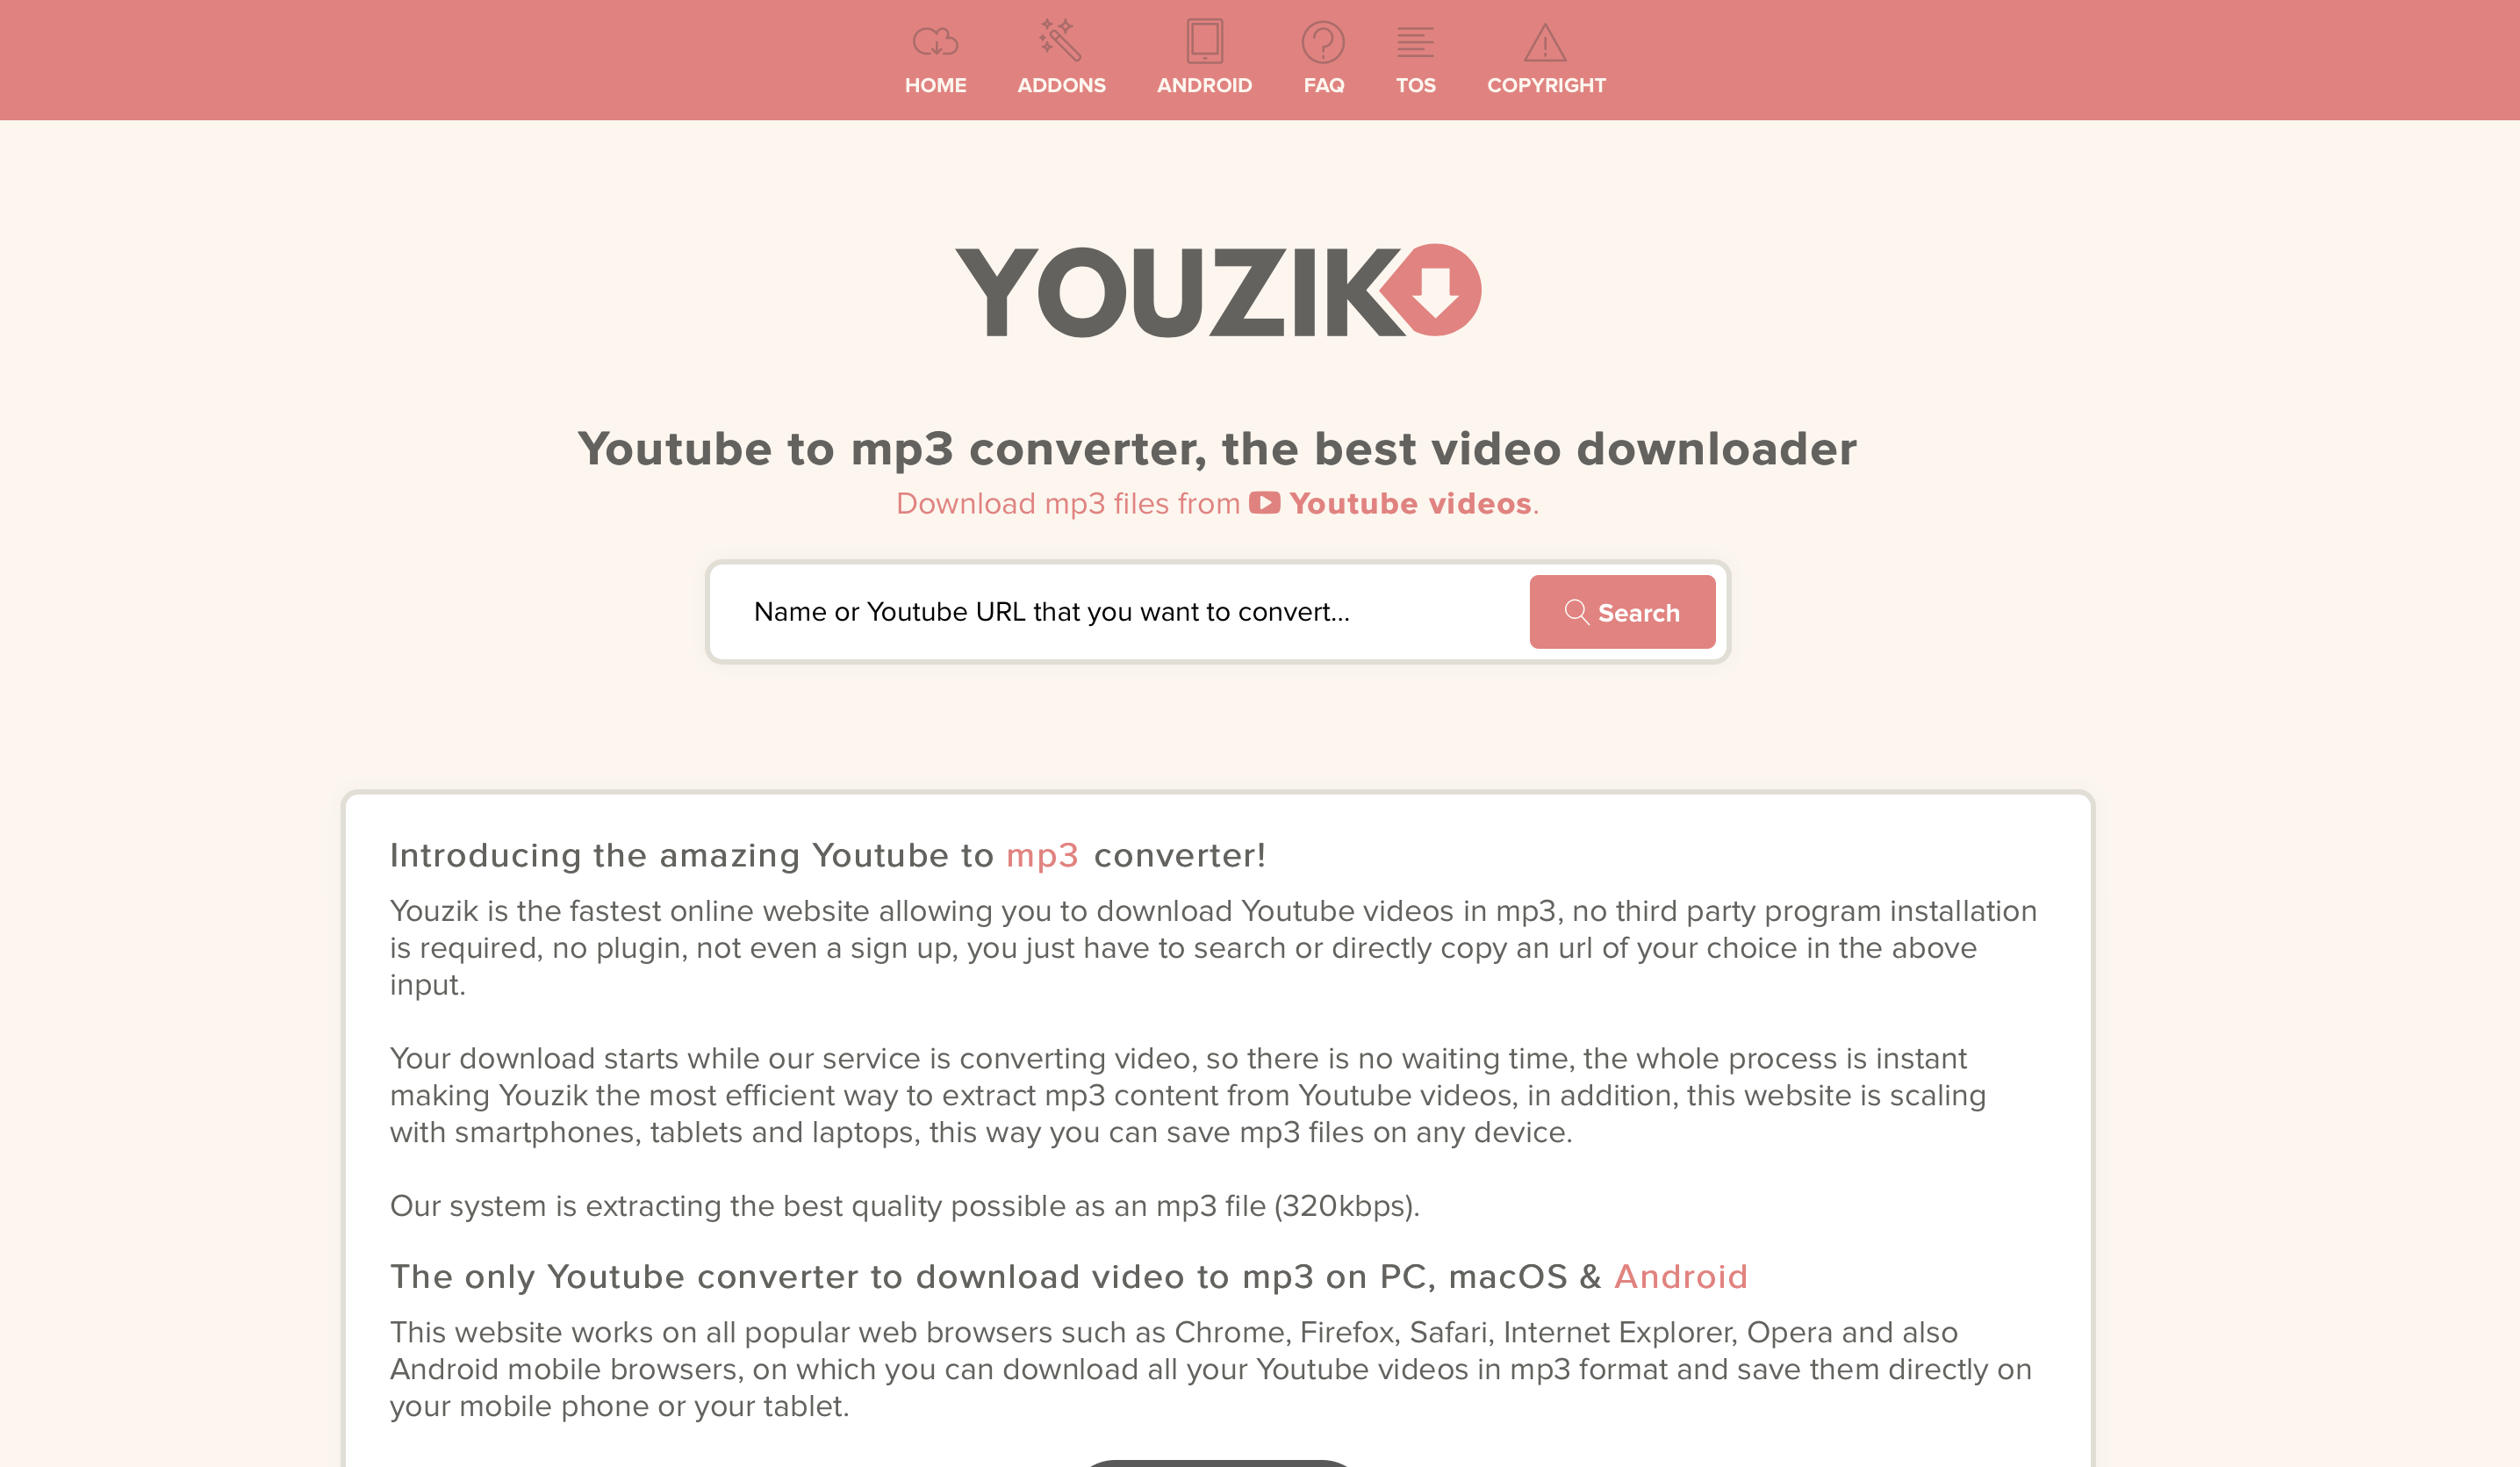 best free youtube to mp3 converter for android